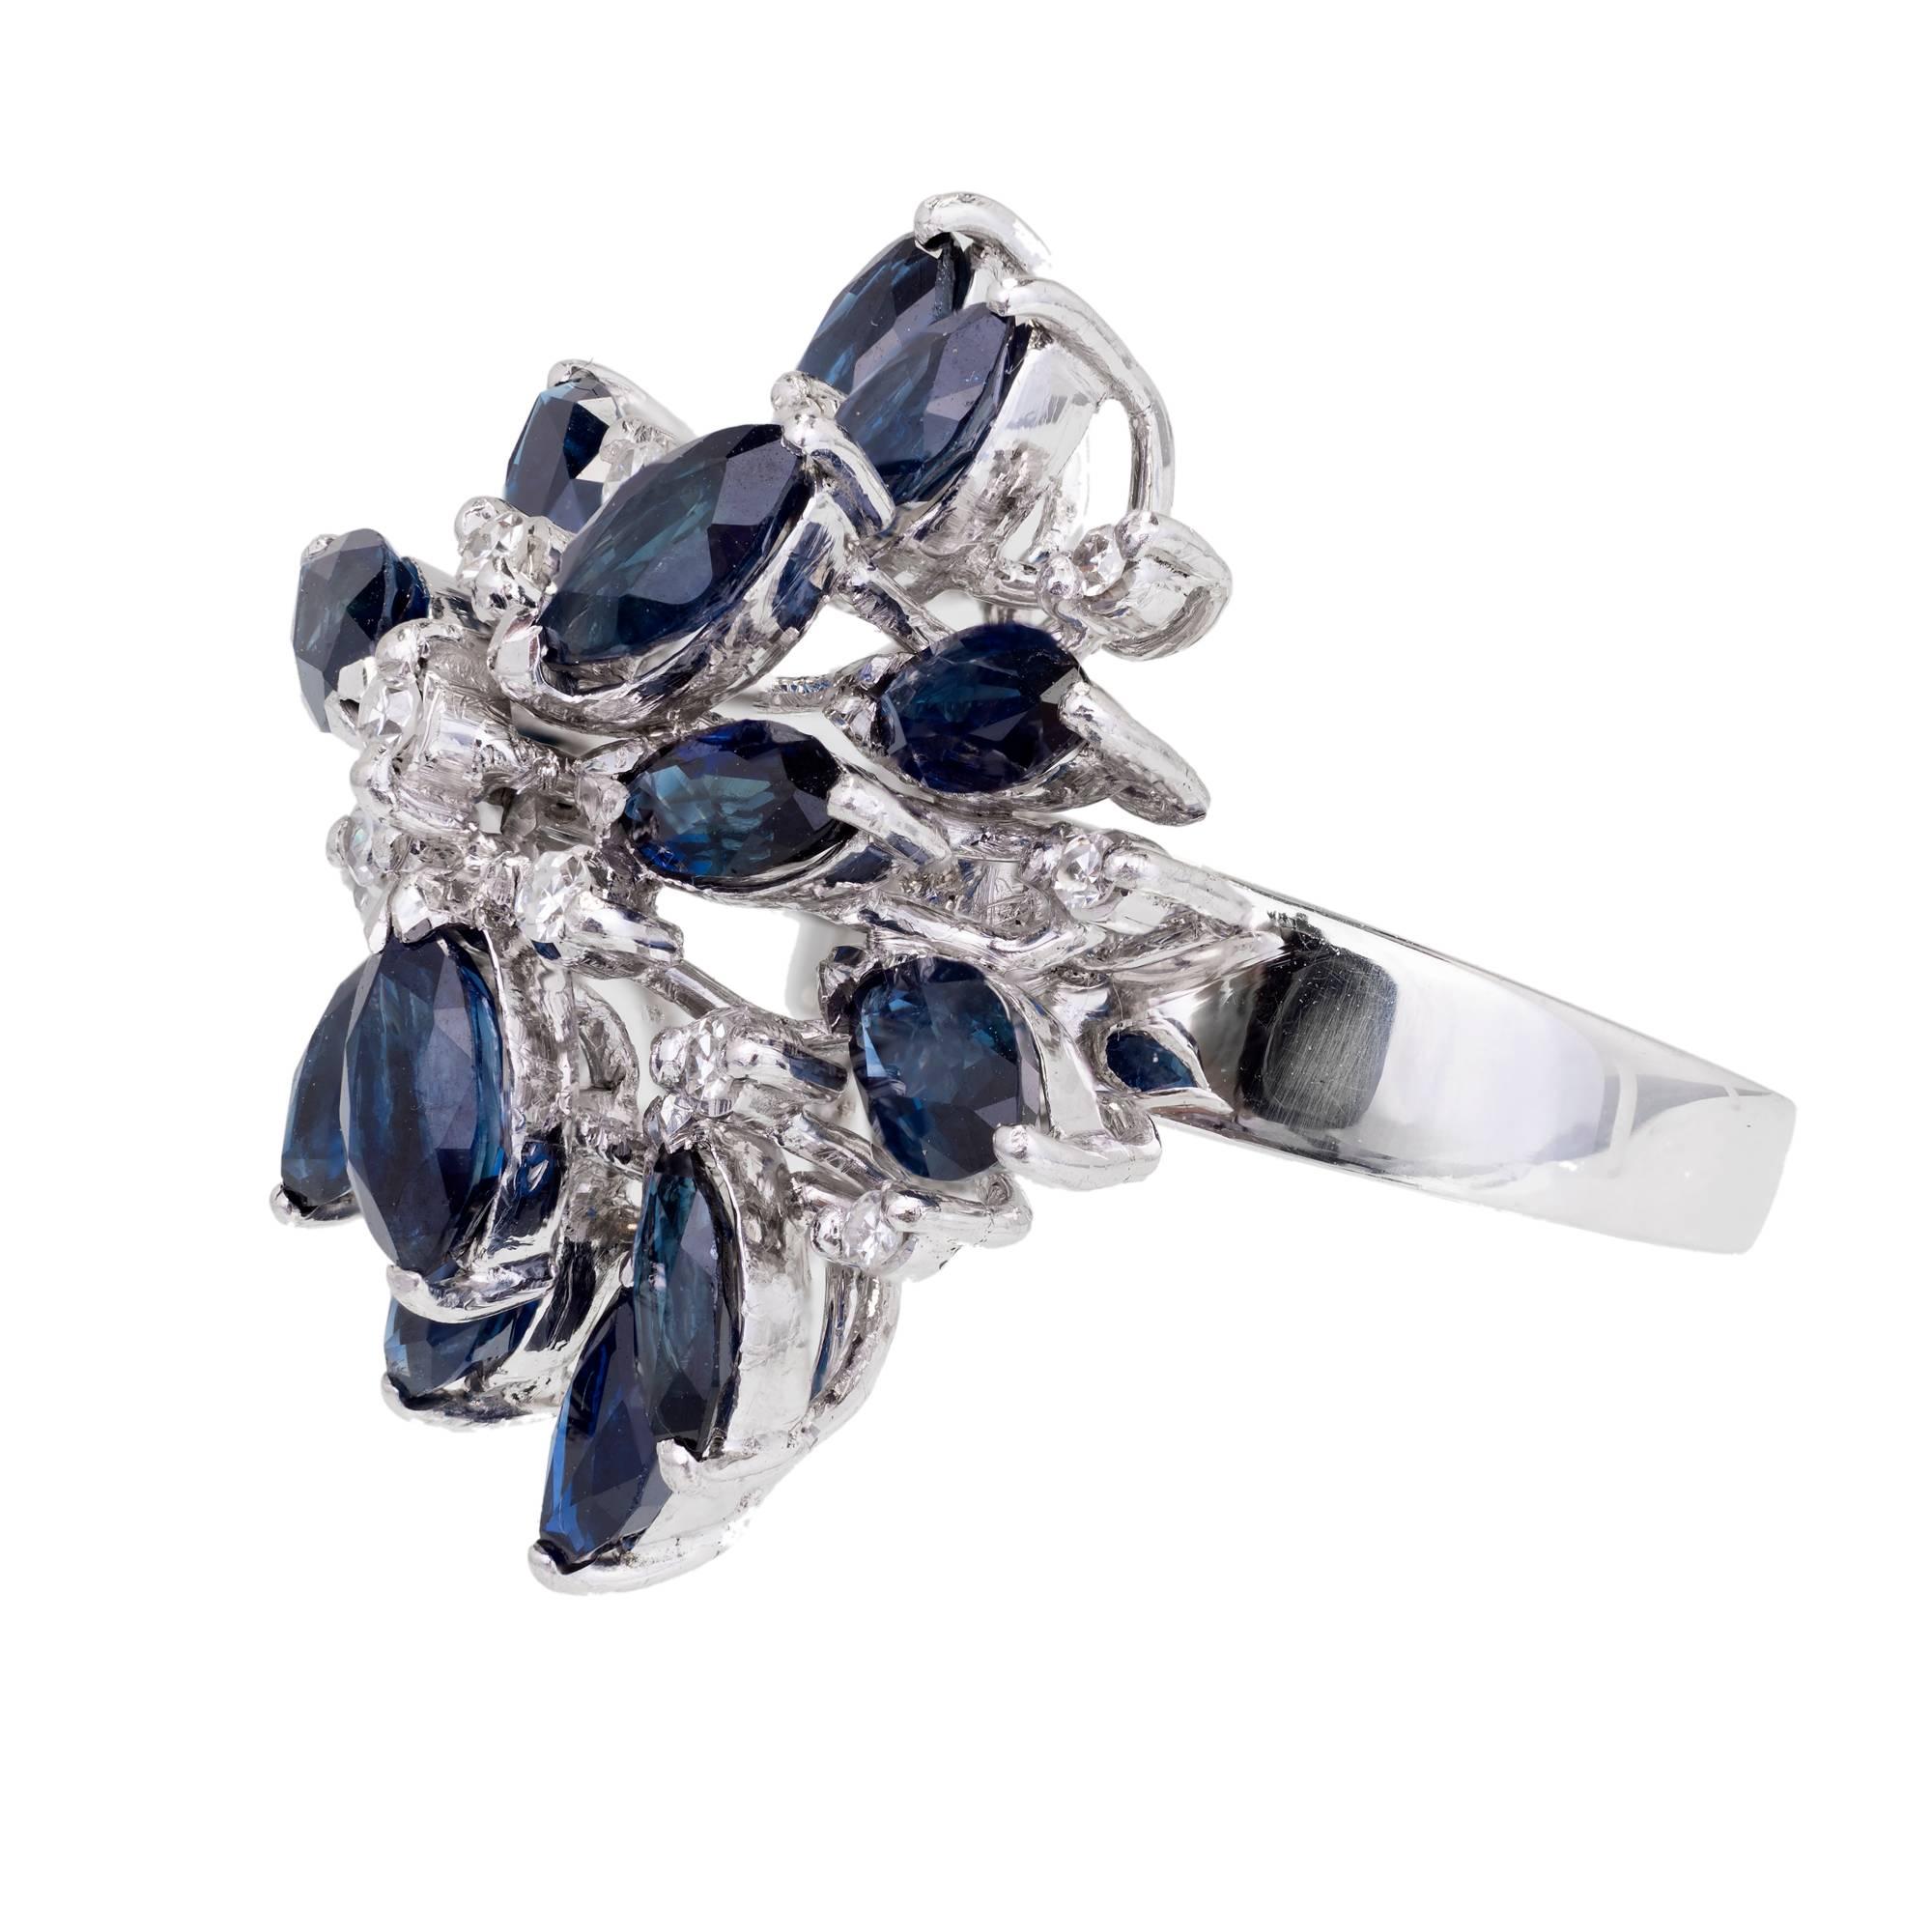 1960’s handmade wire top dome ring set with bright blue Marquise Sapphires and round Diamonds.

15 Marquise blue Sapphires, approx. total weight 5.25cts, SI, 6 x 3mm
14 round single cut Diamonds, approx. total weight .15cts, H, VS
18k white gold
8.6